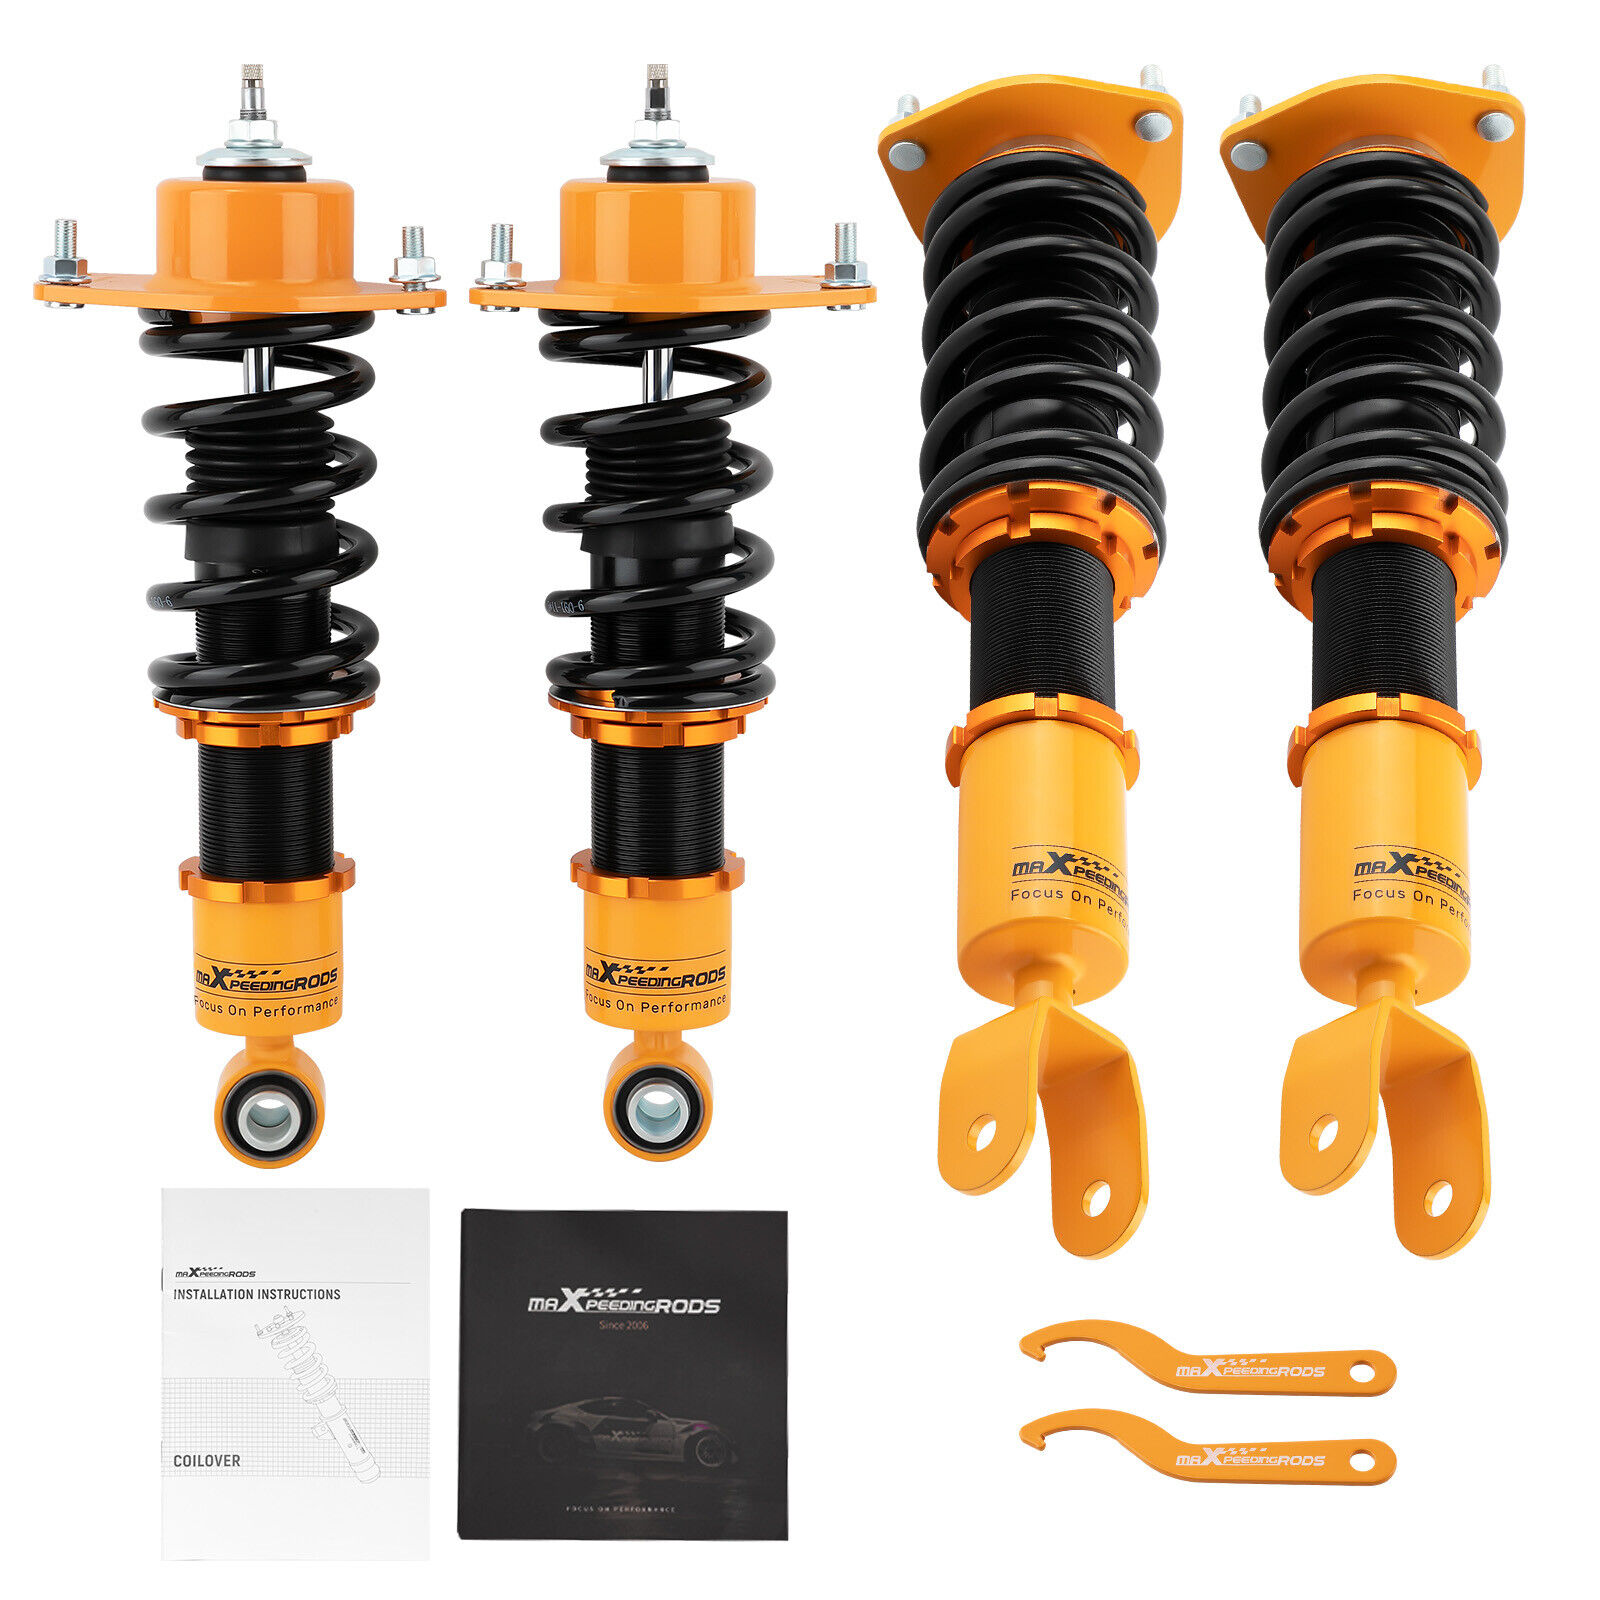 24 Click Damper Coilovers Lowering Suspension Kit for Mazda RX-8 RX8 2004-2011